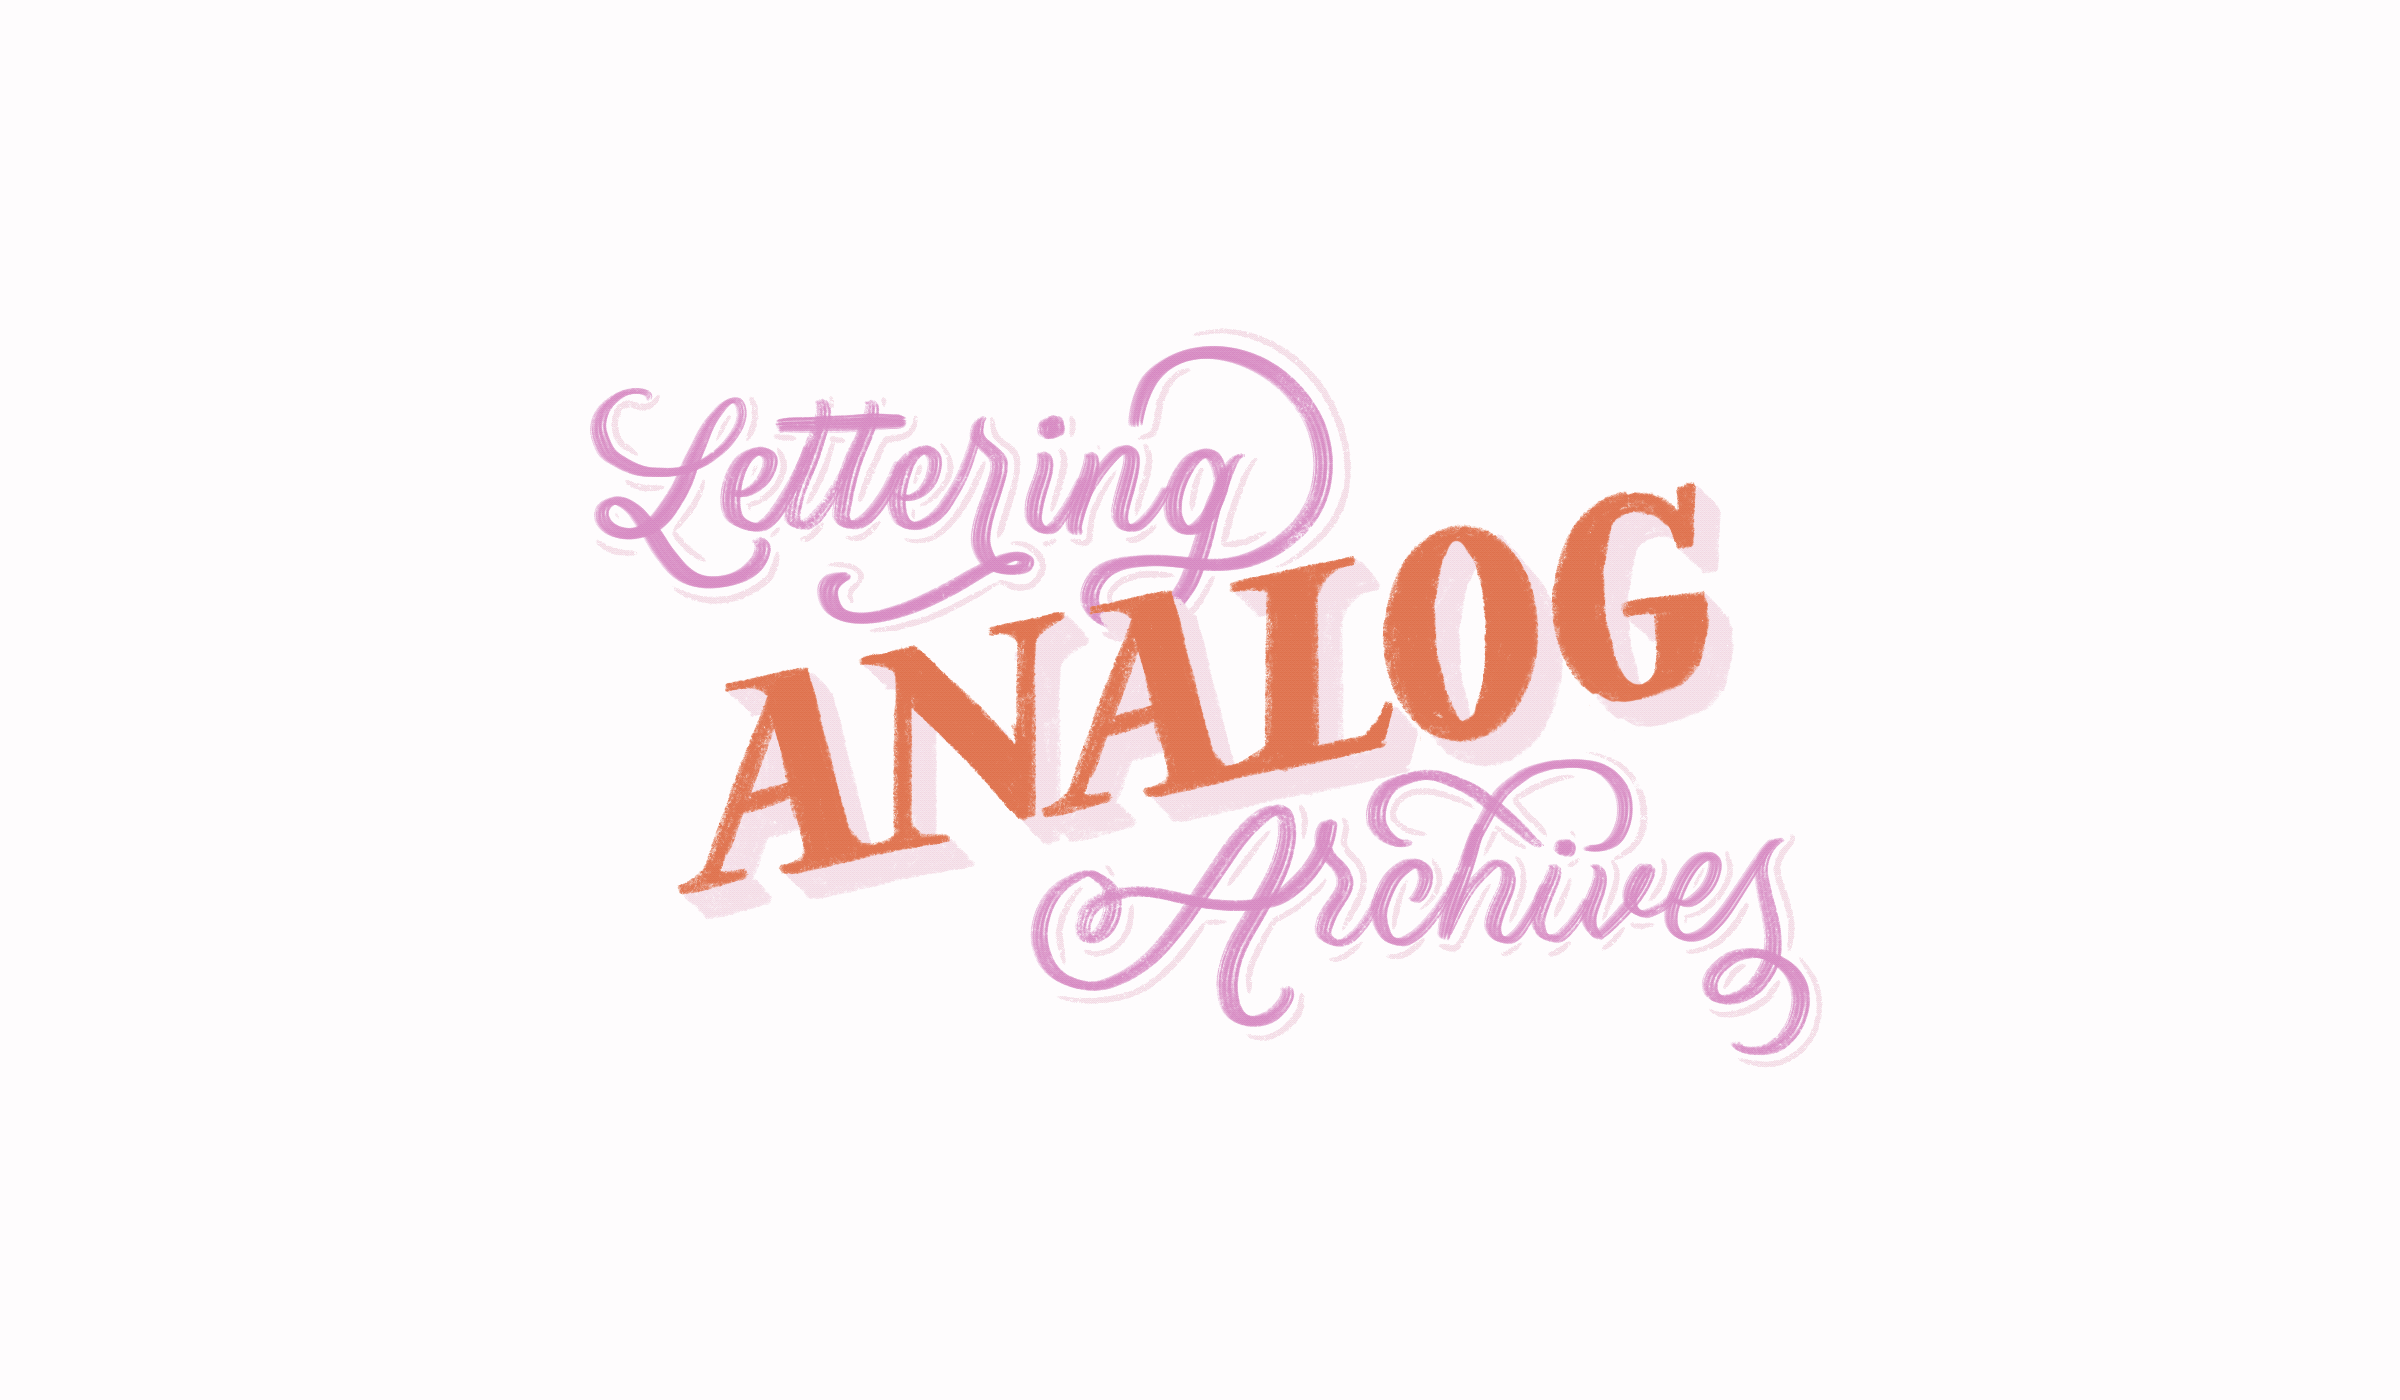 Lettering Analog Archives analog brush calligraphy brush lettering brush pen custom lettering design drawing dribbble freethrow hand drawn hand lettering hand made illustration lettering pen and paper procreate